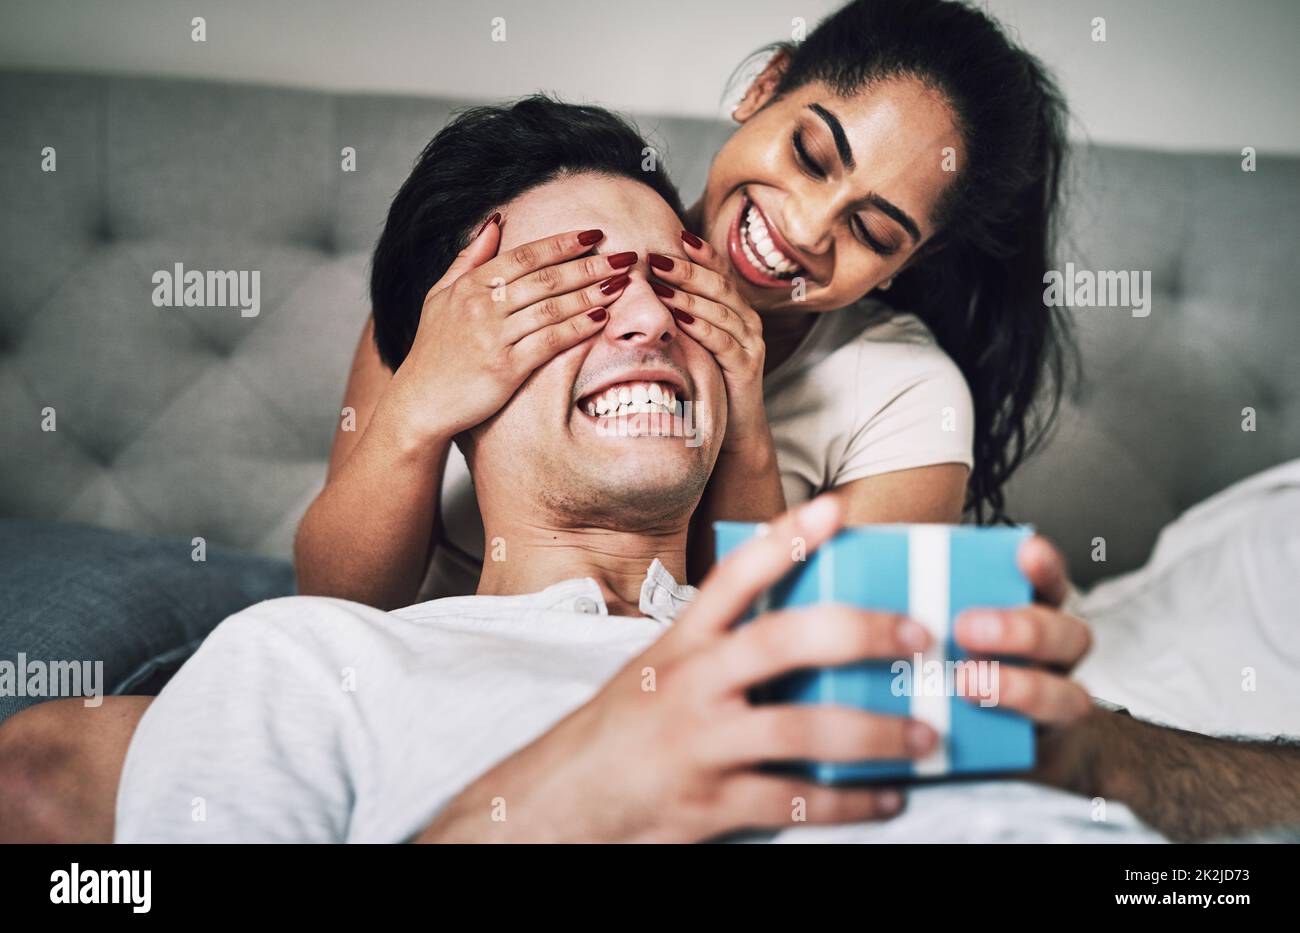 Are you ready to see what I got you. Shot of a woman covering her boyfriends eyes while surprising him with a gift. Stock Photo